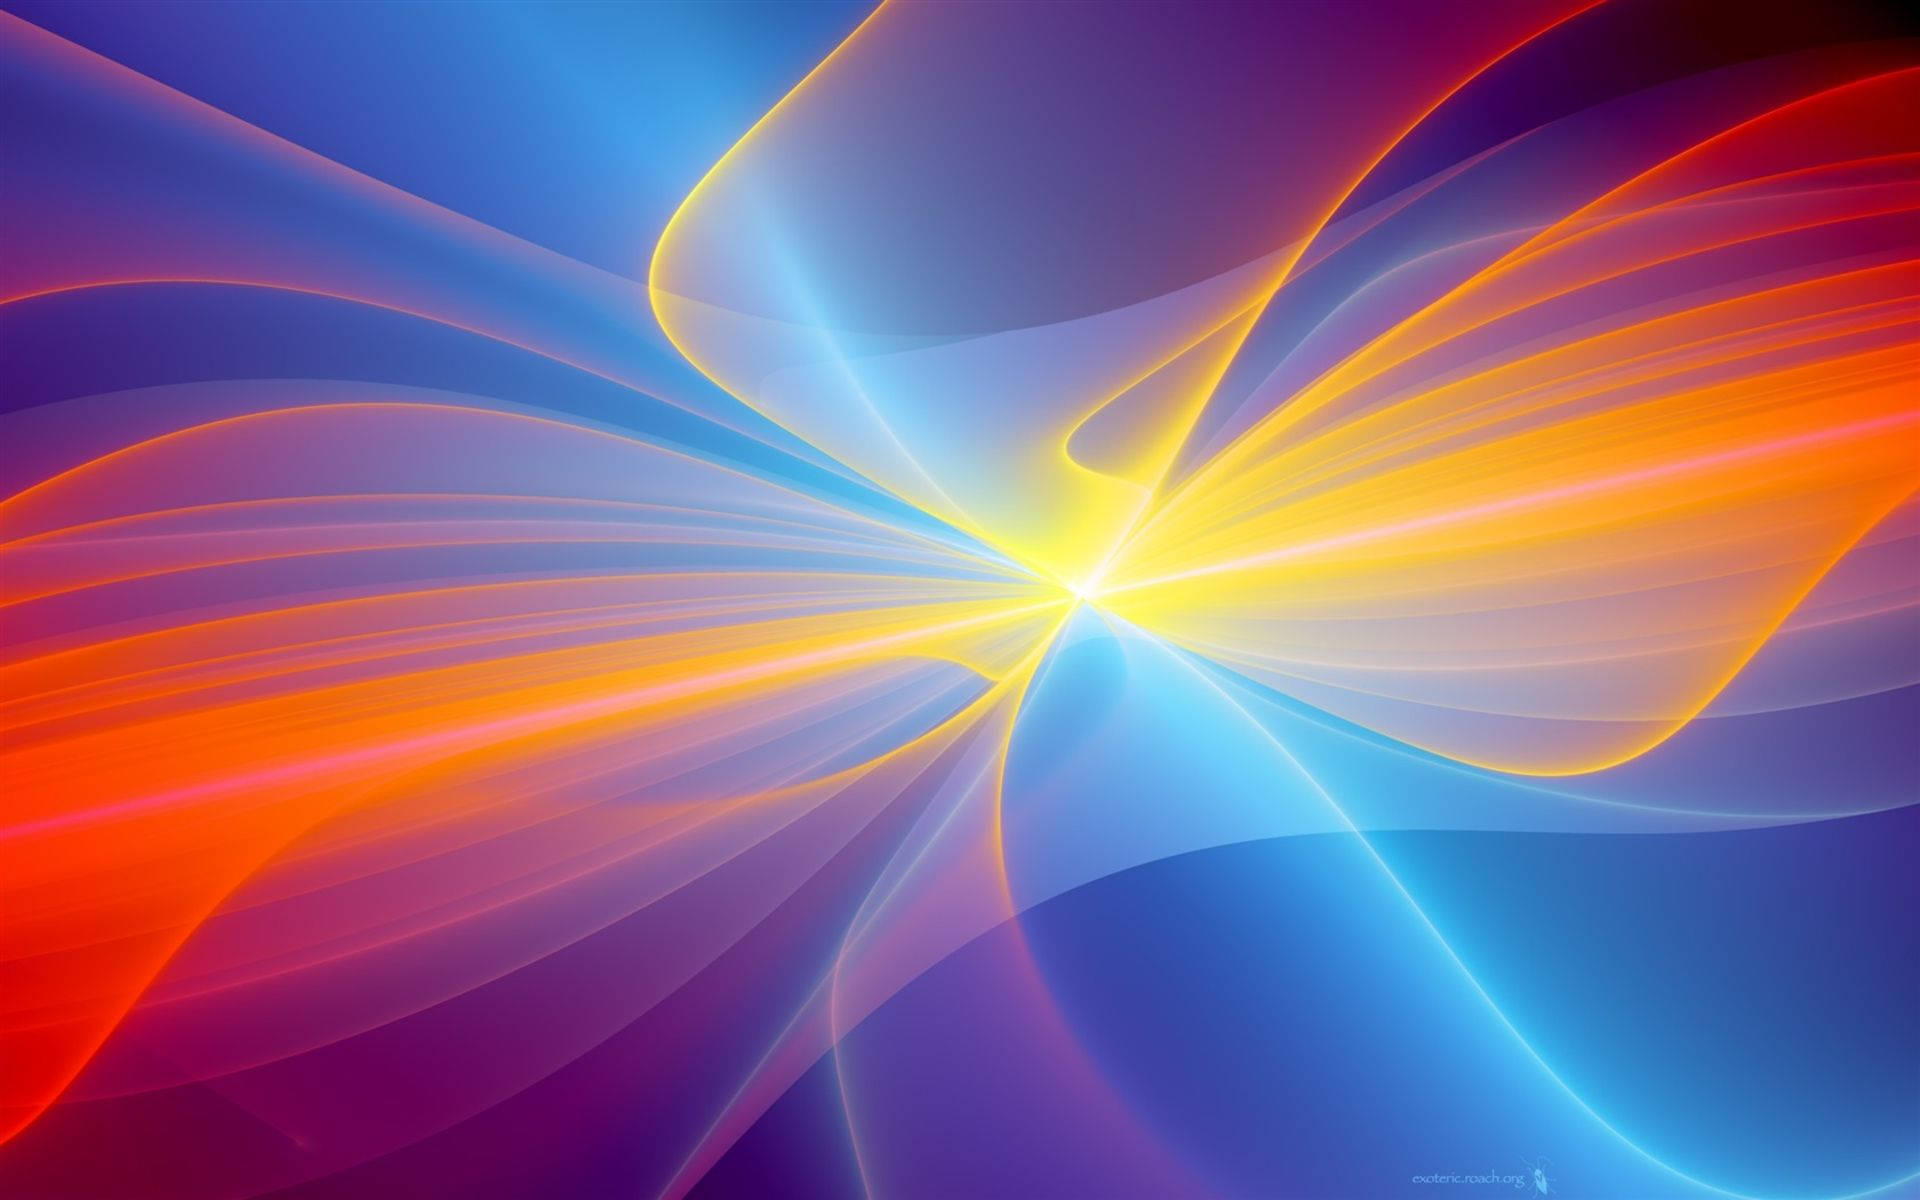 A Striking Blue And Orange Abstract Background